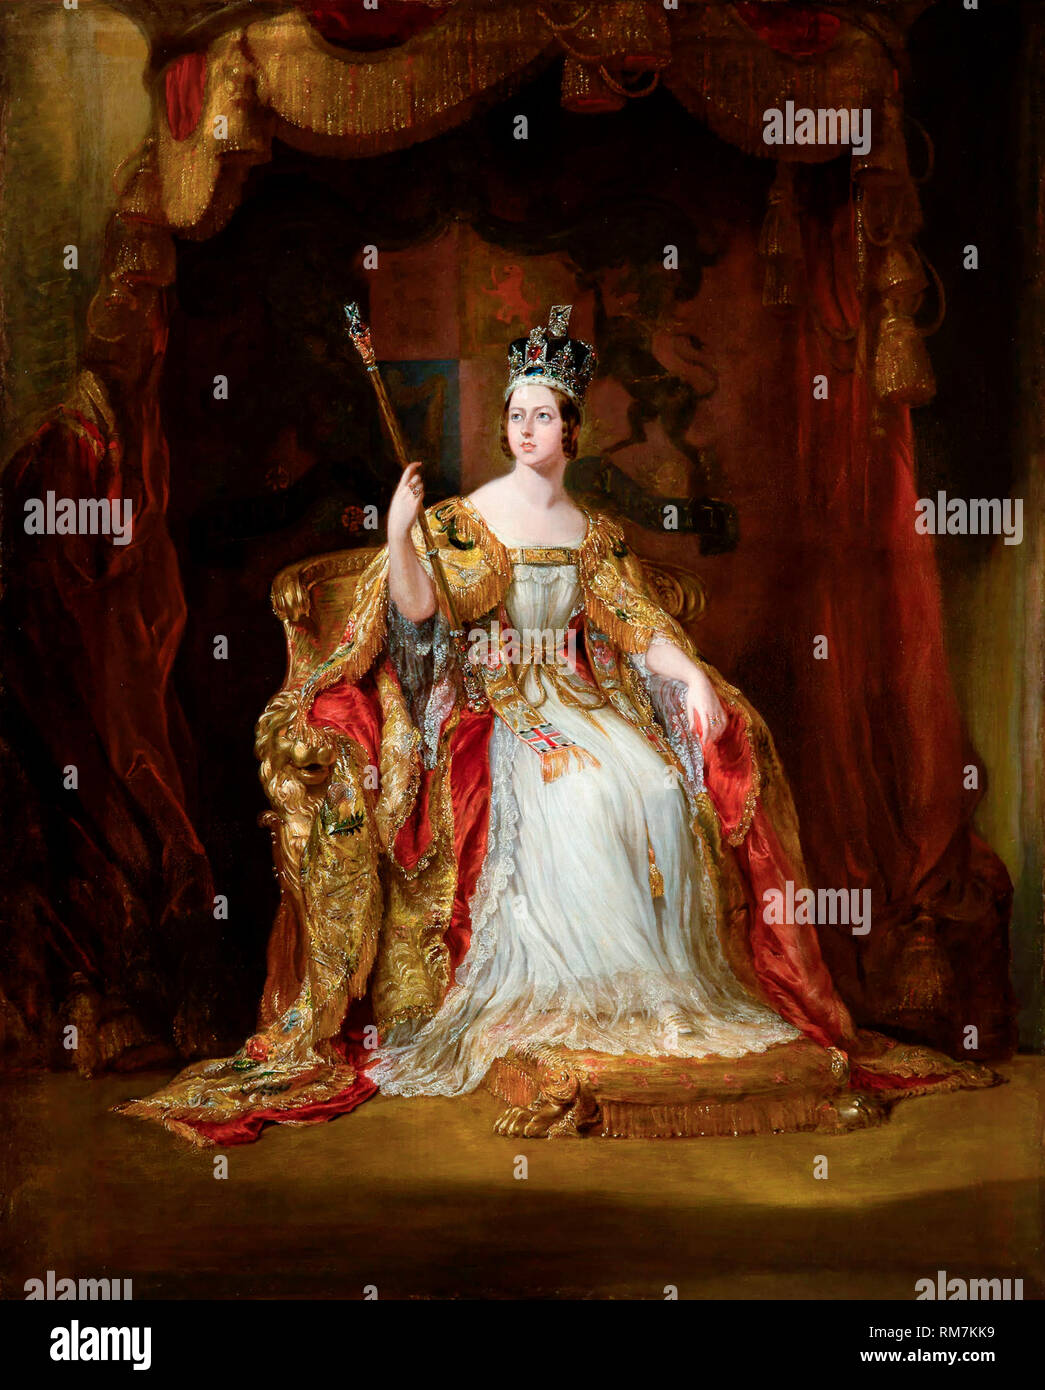 Queen Victoria of the United Kingdom in Coronation Robes. Coronation portrait painting by George Hayter, circa 1838-1840 Stock Photo